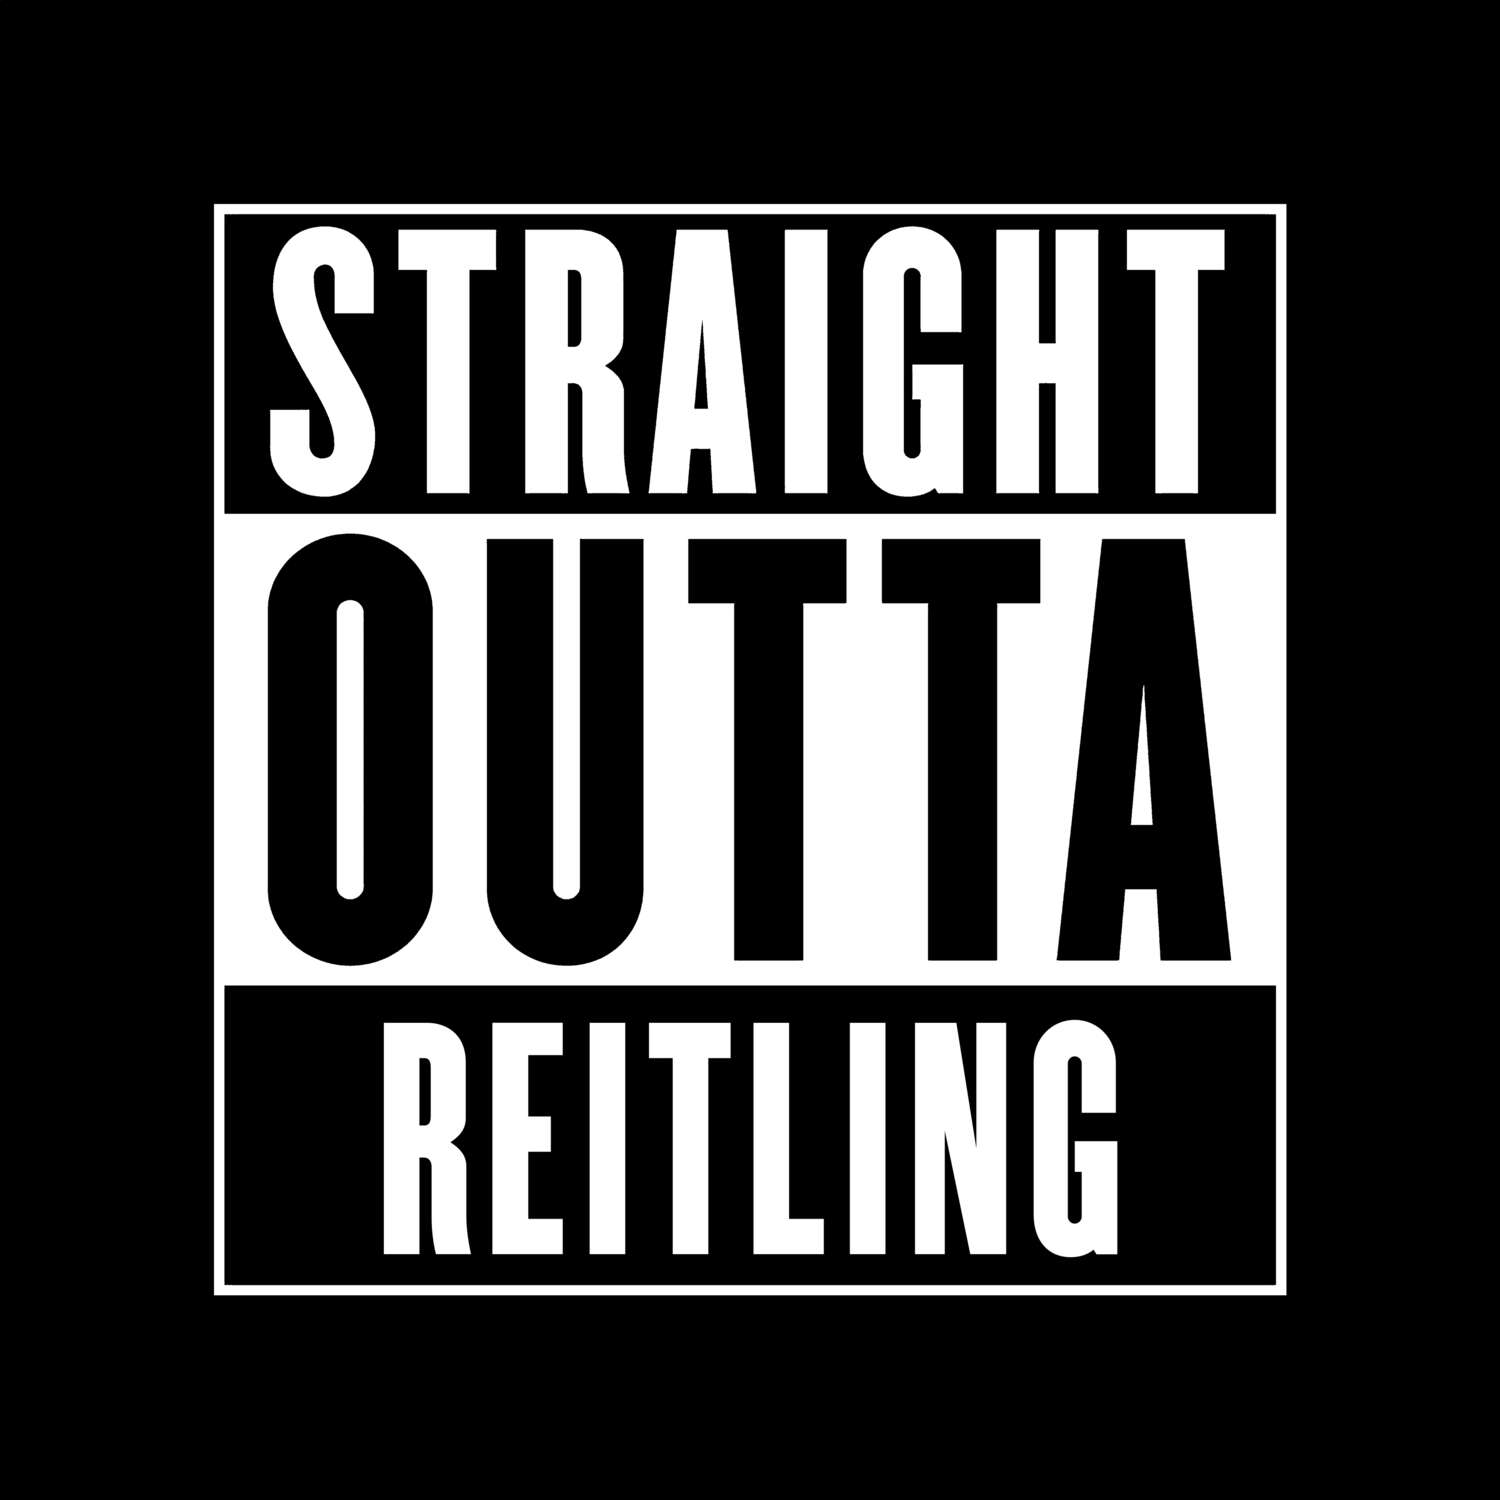 Reitling T-Shirt »Straight Outta«